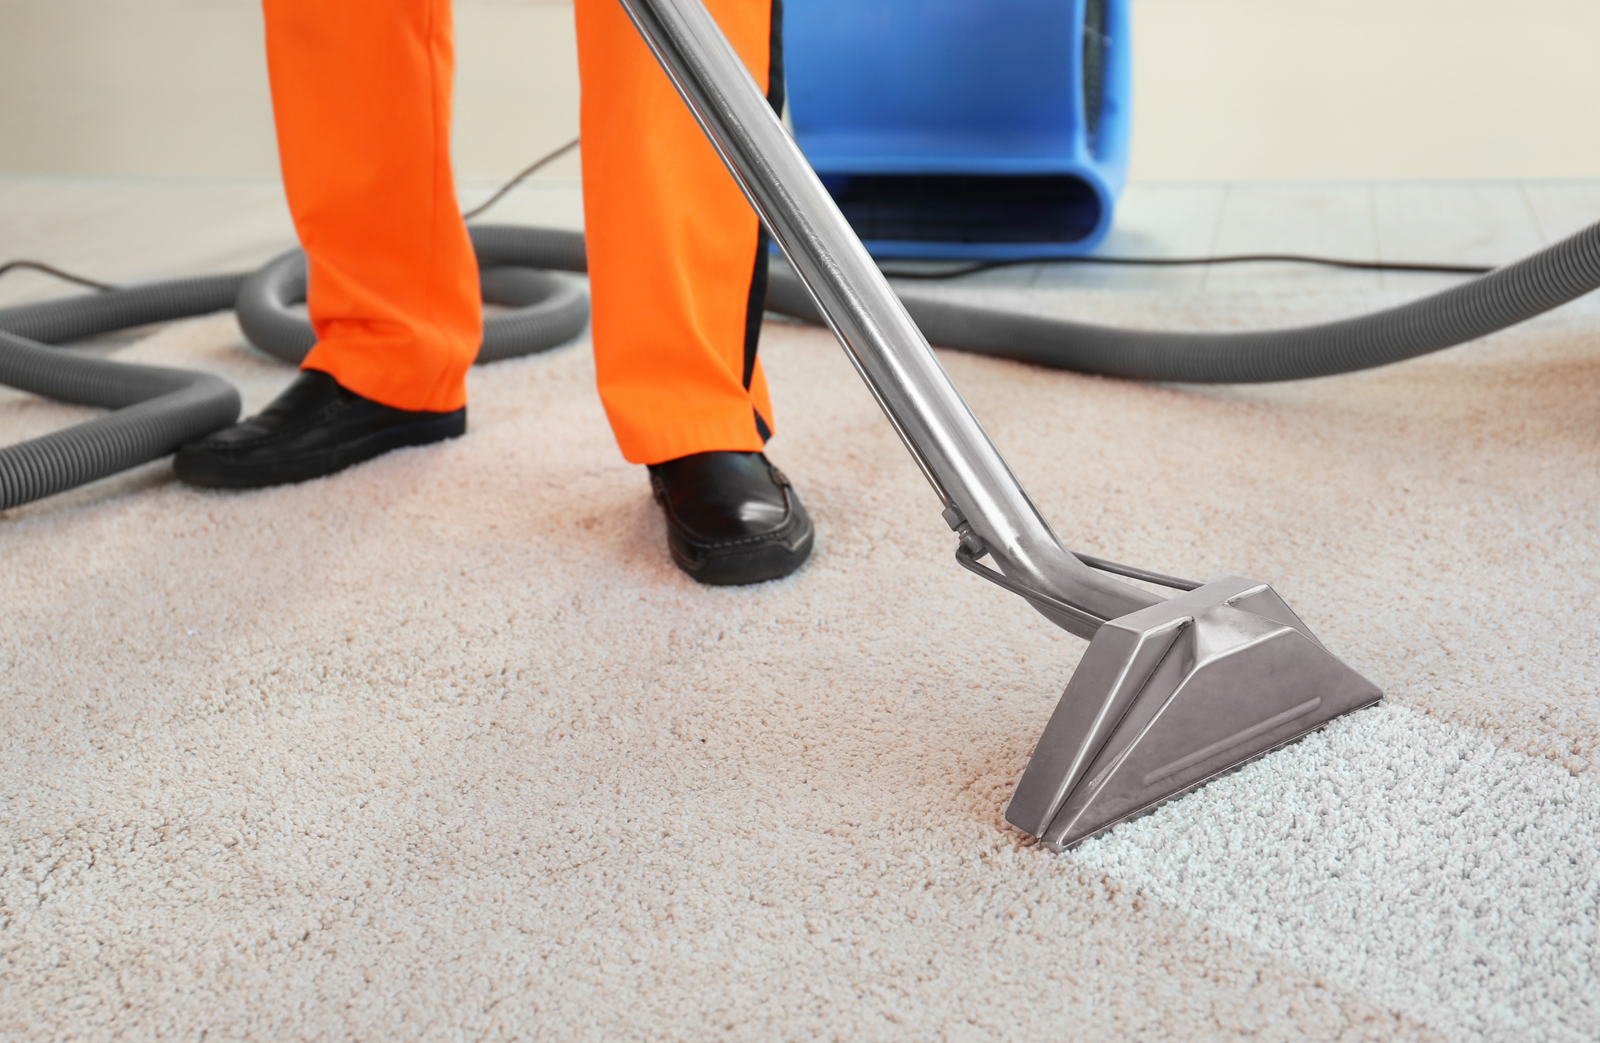 WINTER CARPET CLEANING SPECIALISTS IN NJ AND PA